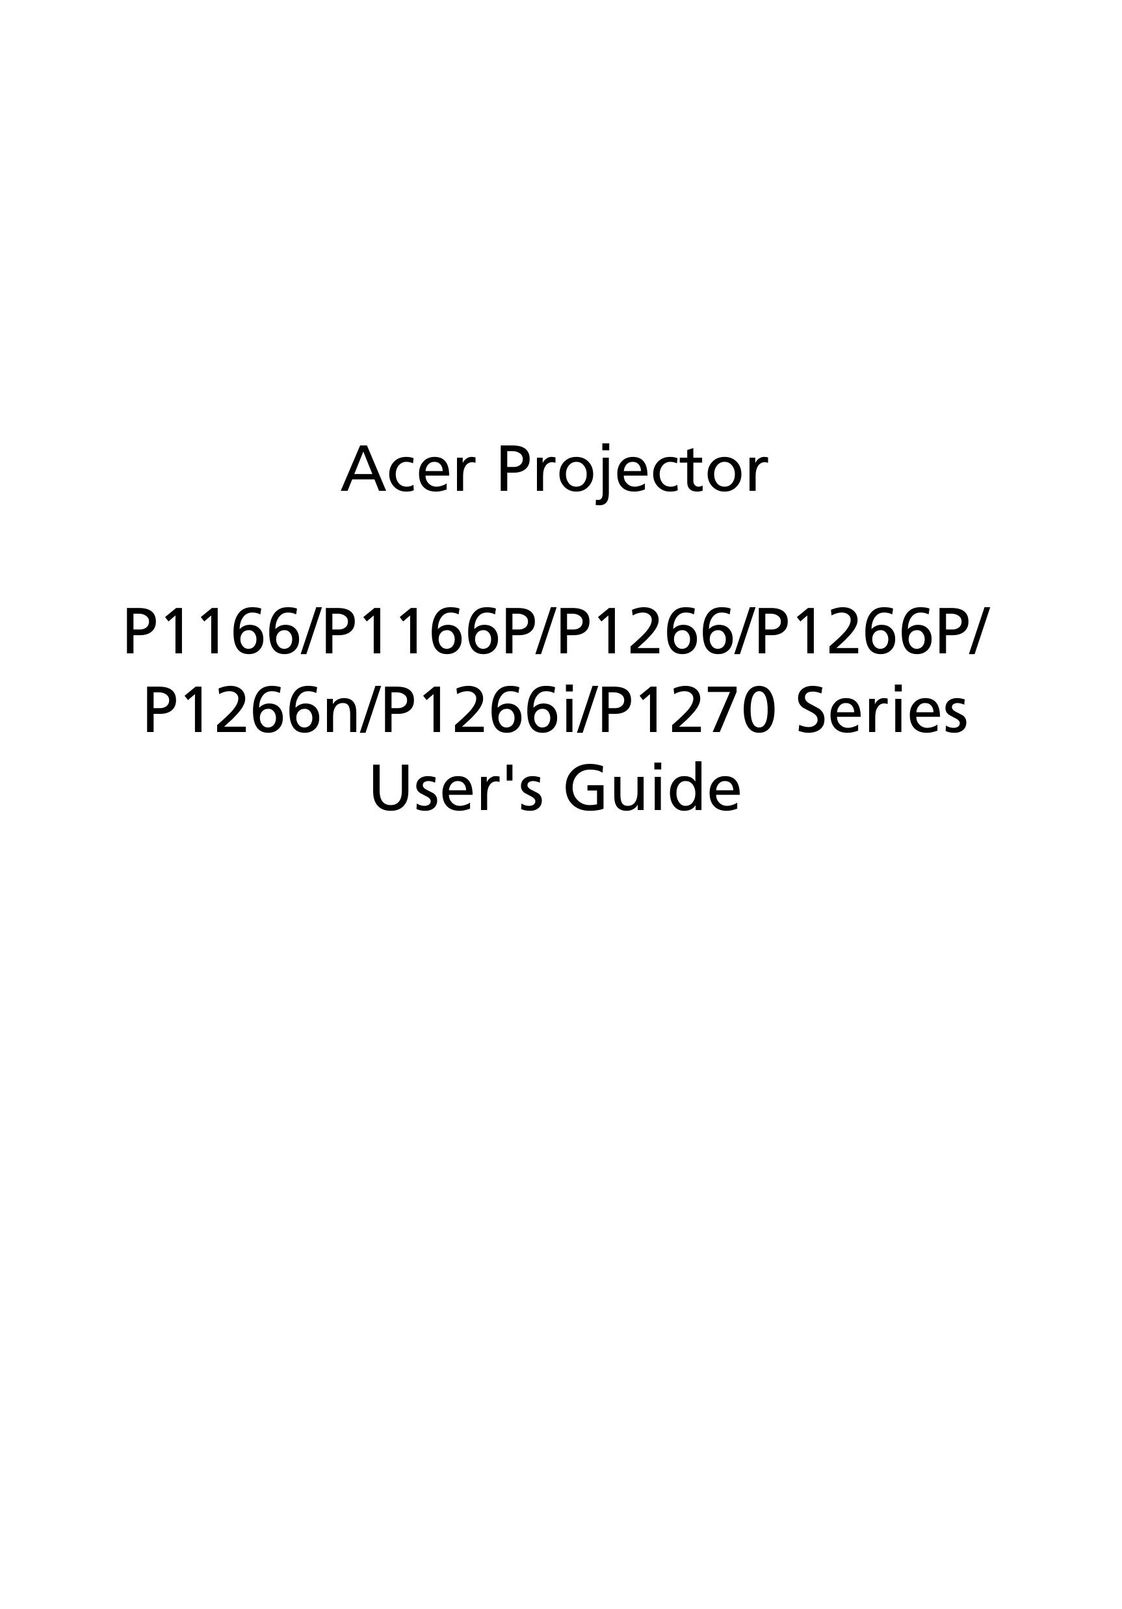 Acer P1266N Projector User Manual